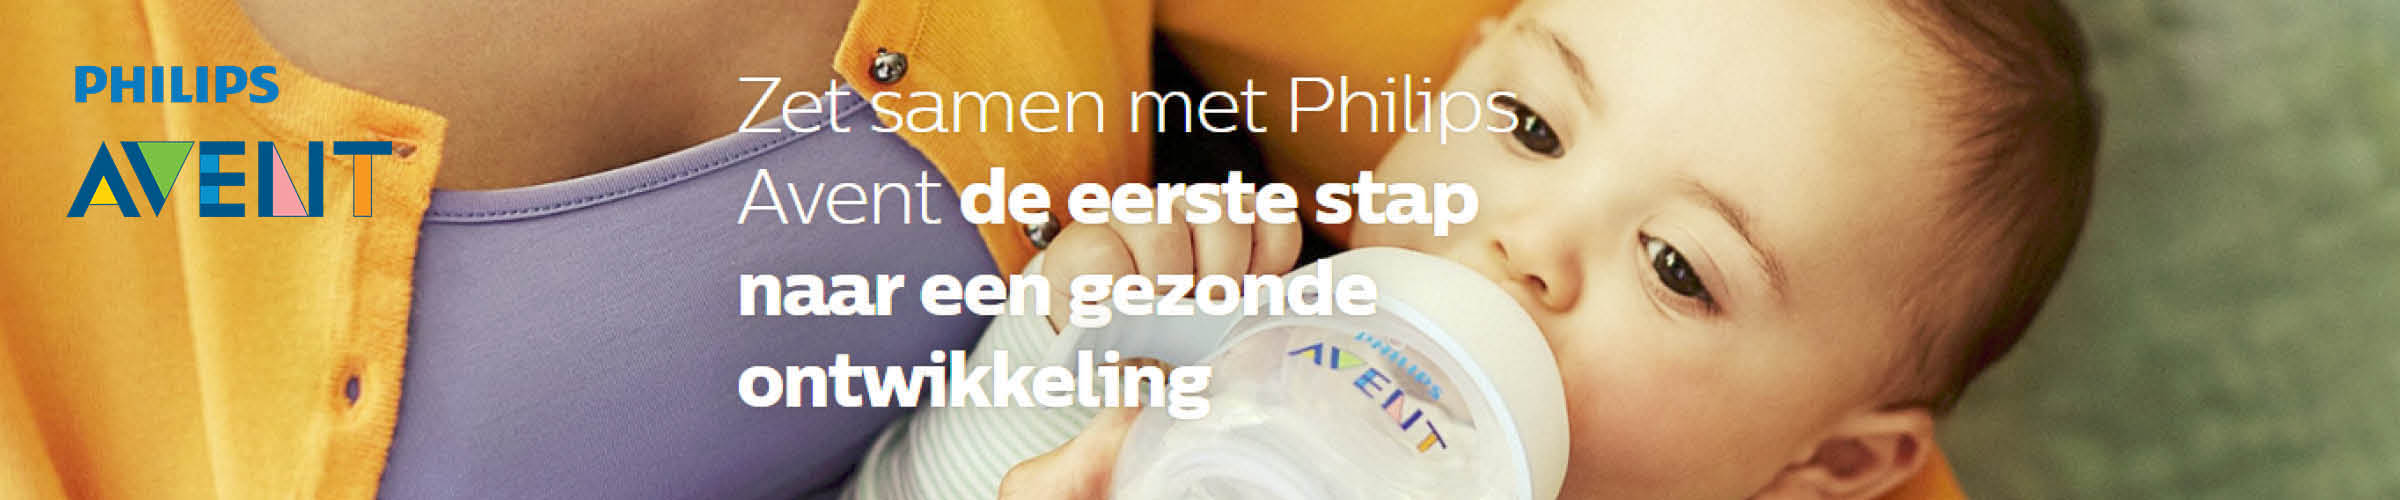 philips avent drinkbekers